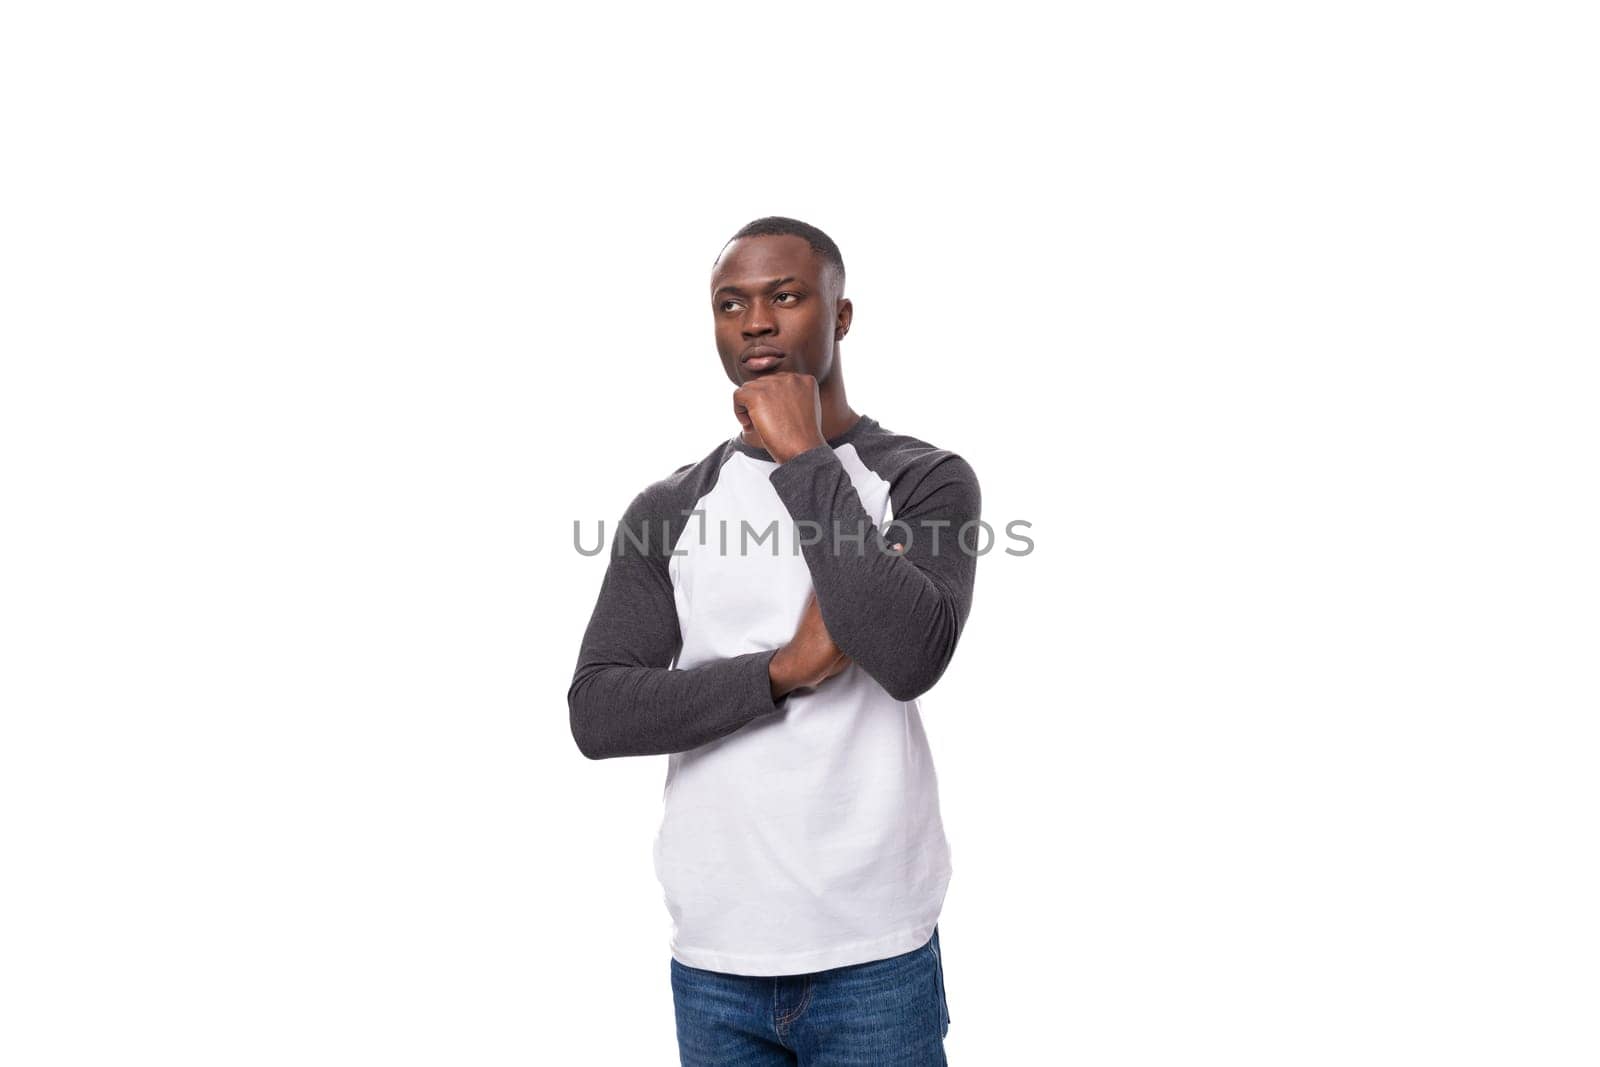 young american man with short haircut stands thoughtfully over isolated white background by TRMK